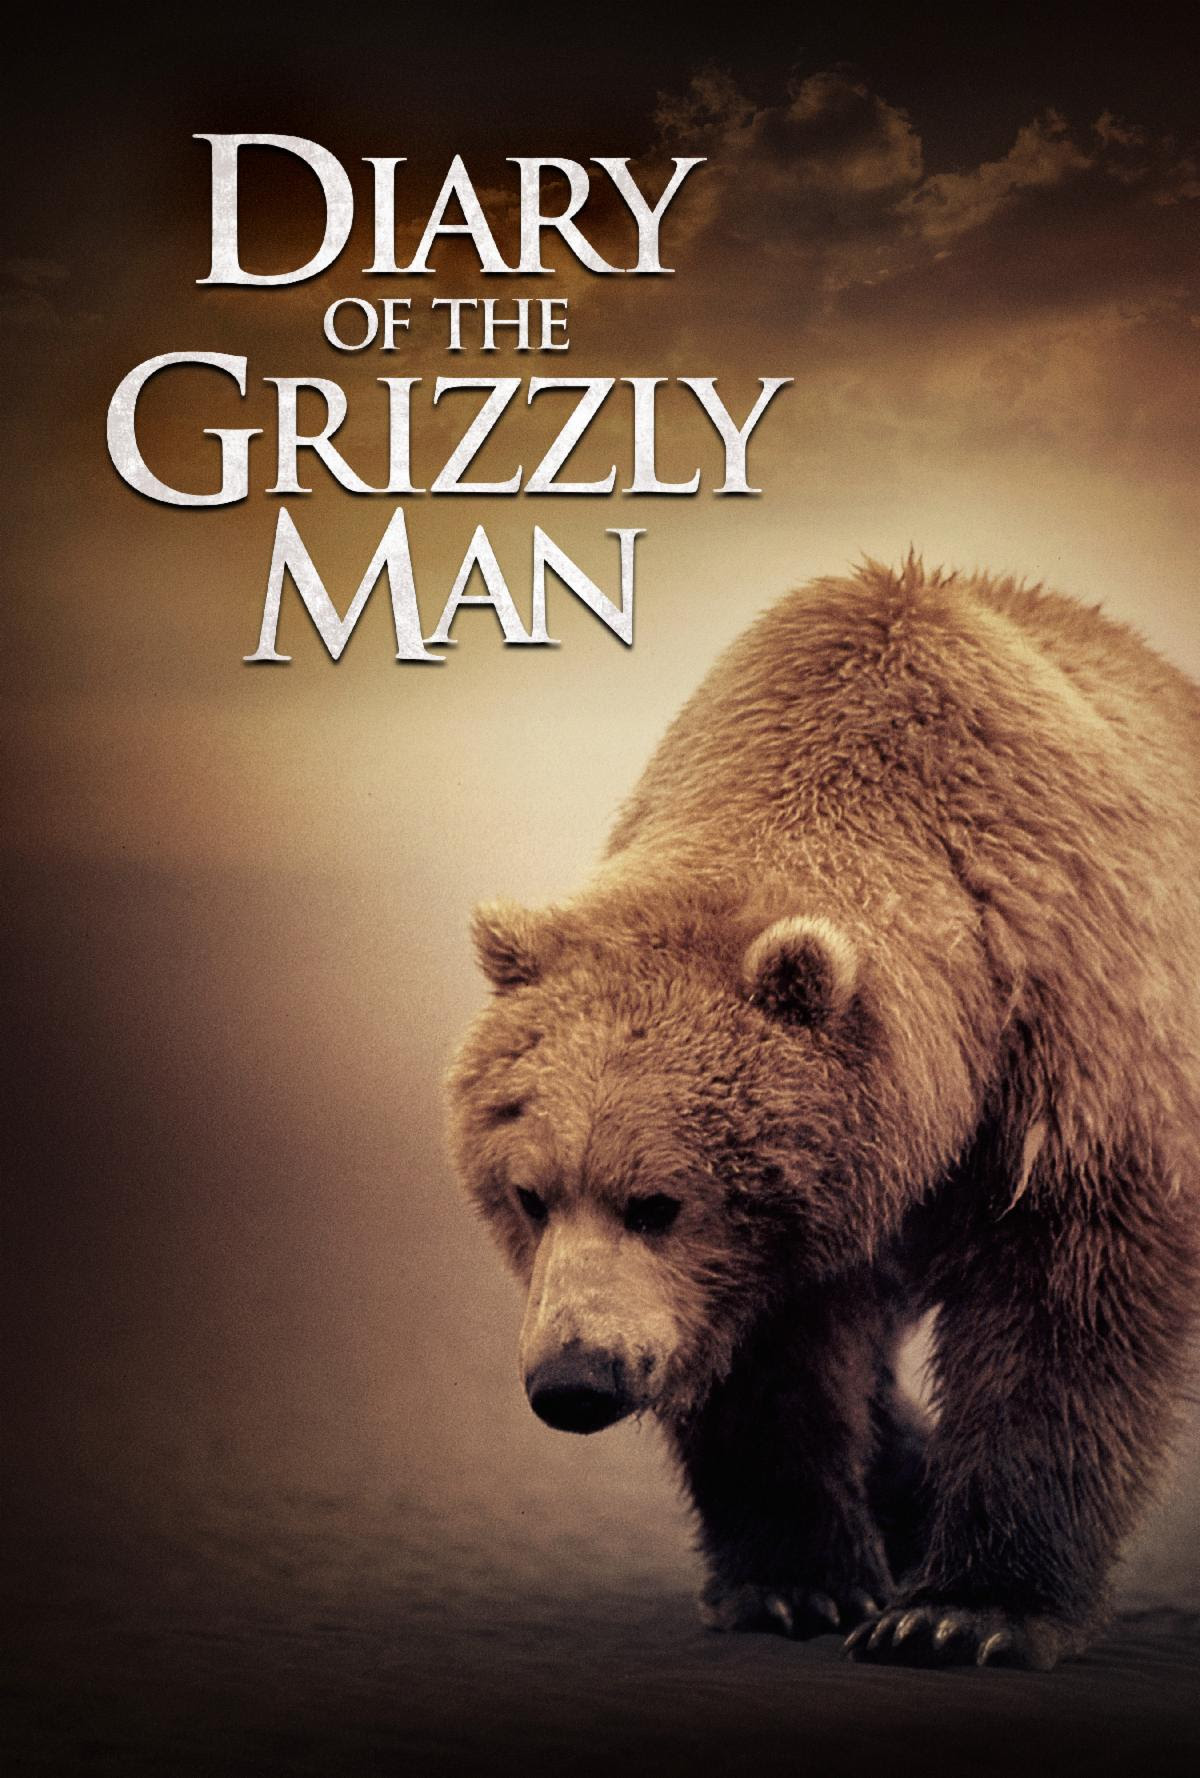 The Bear Truth with Timothy Treadwell and Diary of the Grizzly Man